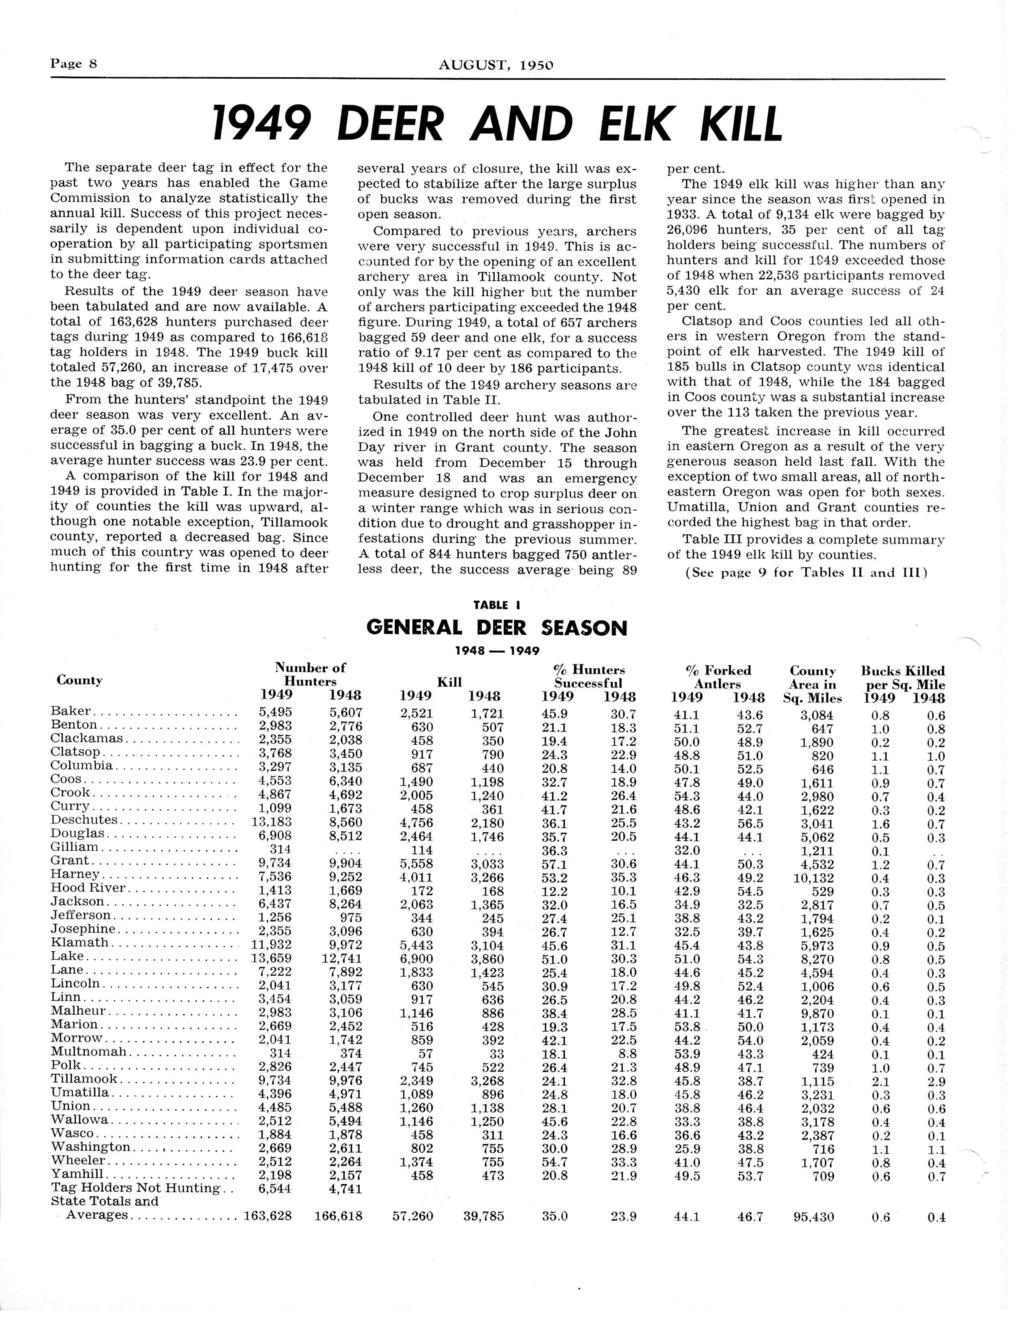 Page 8 AUGUST, 1950 The separate deer tag in effect for the past two years has enabled the Game Commission to analyze statistically the annual kill.